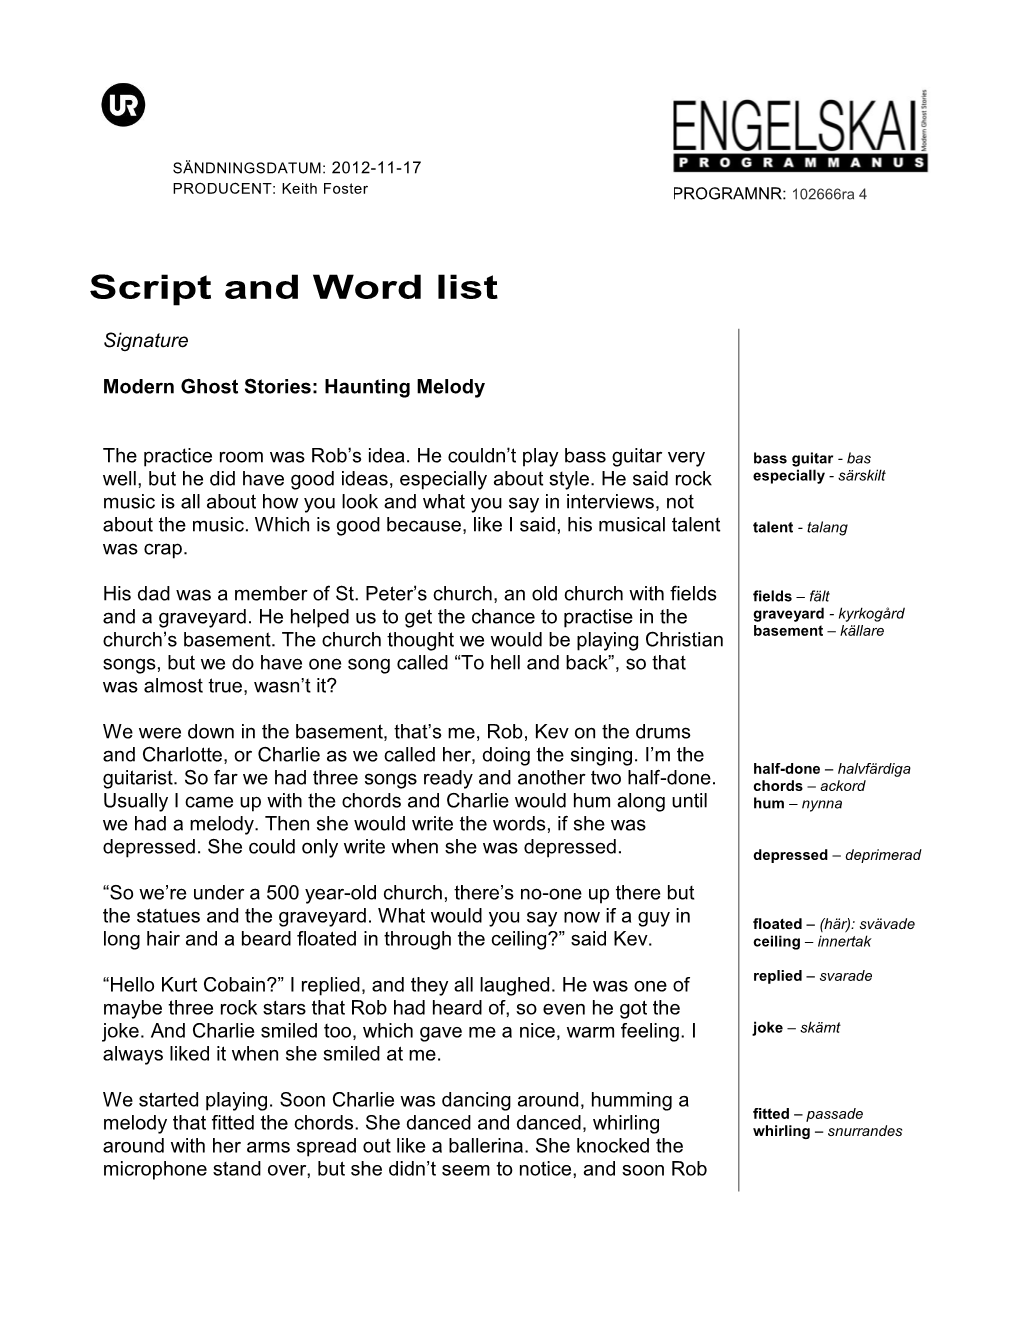 Script and Word List